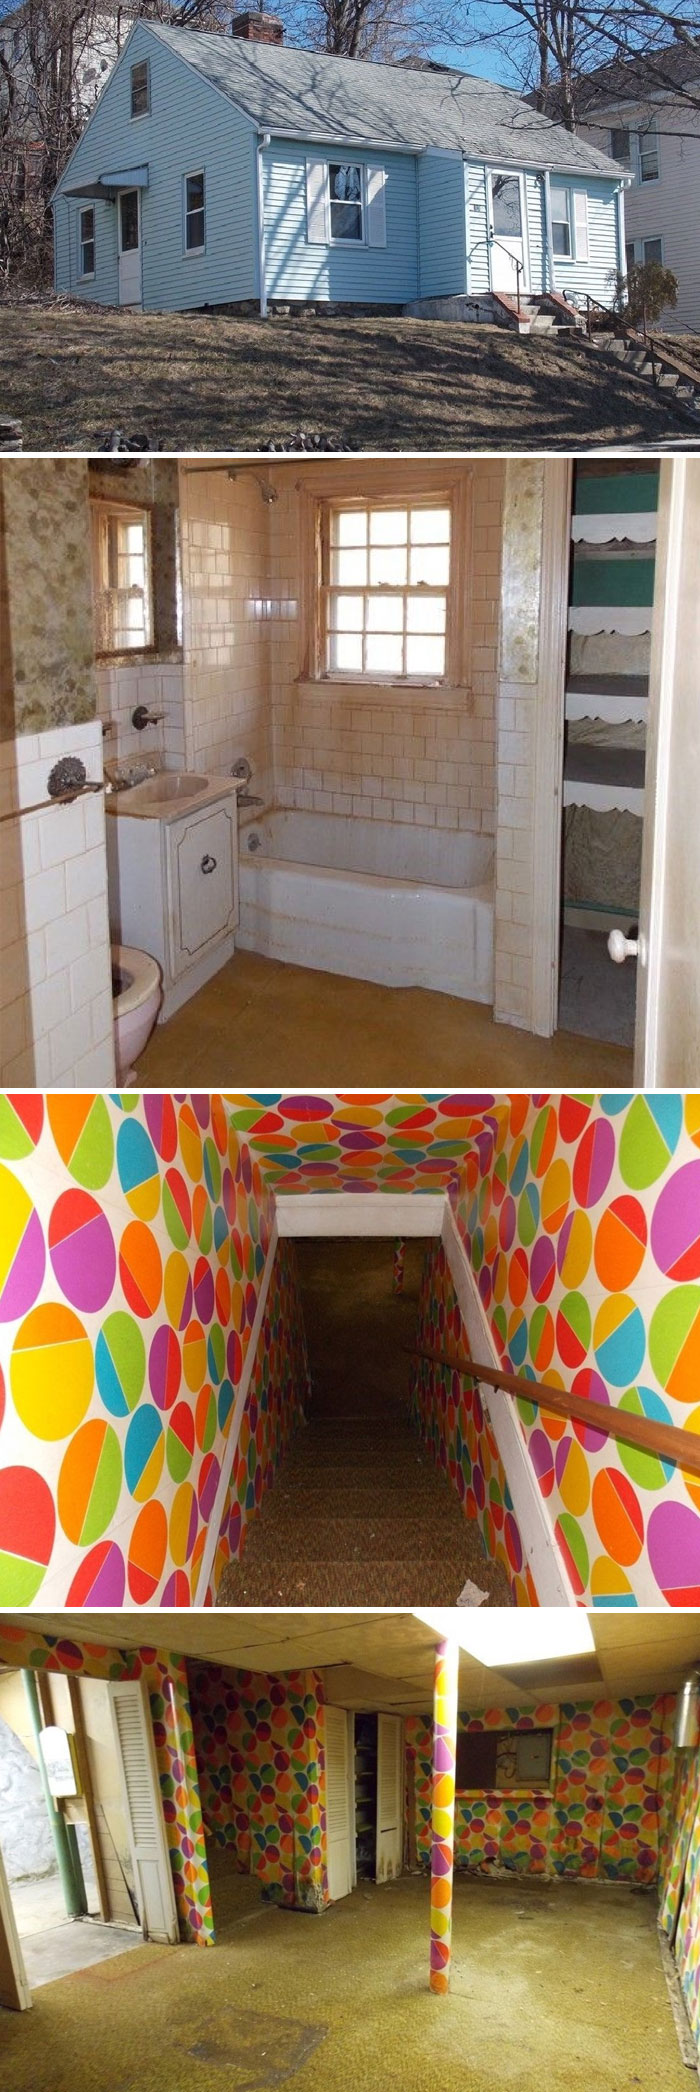 1 Bedroom, 1 Bath, And 1 Portal To Clown Hell